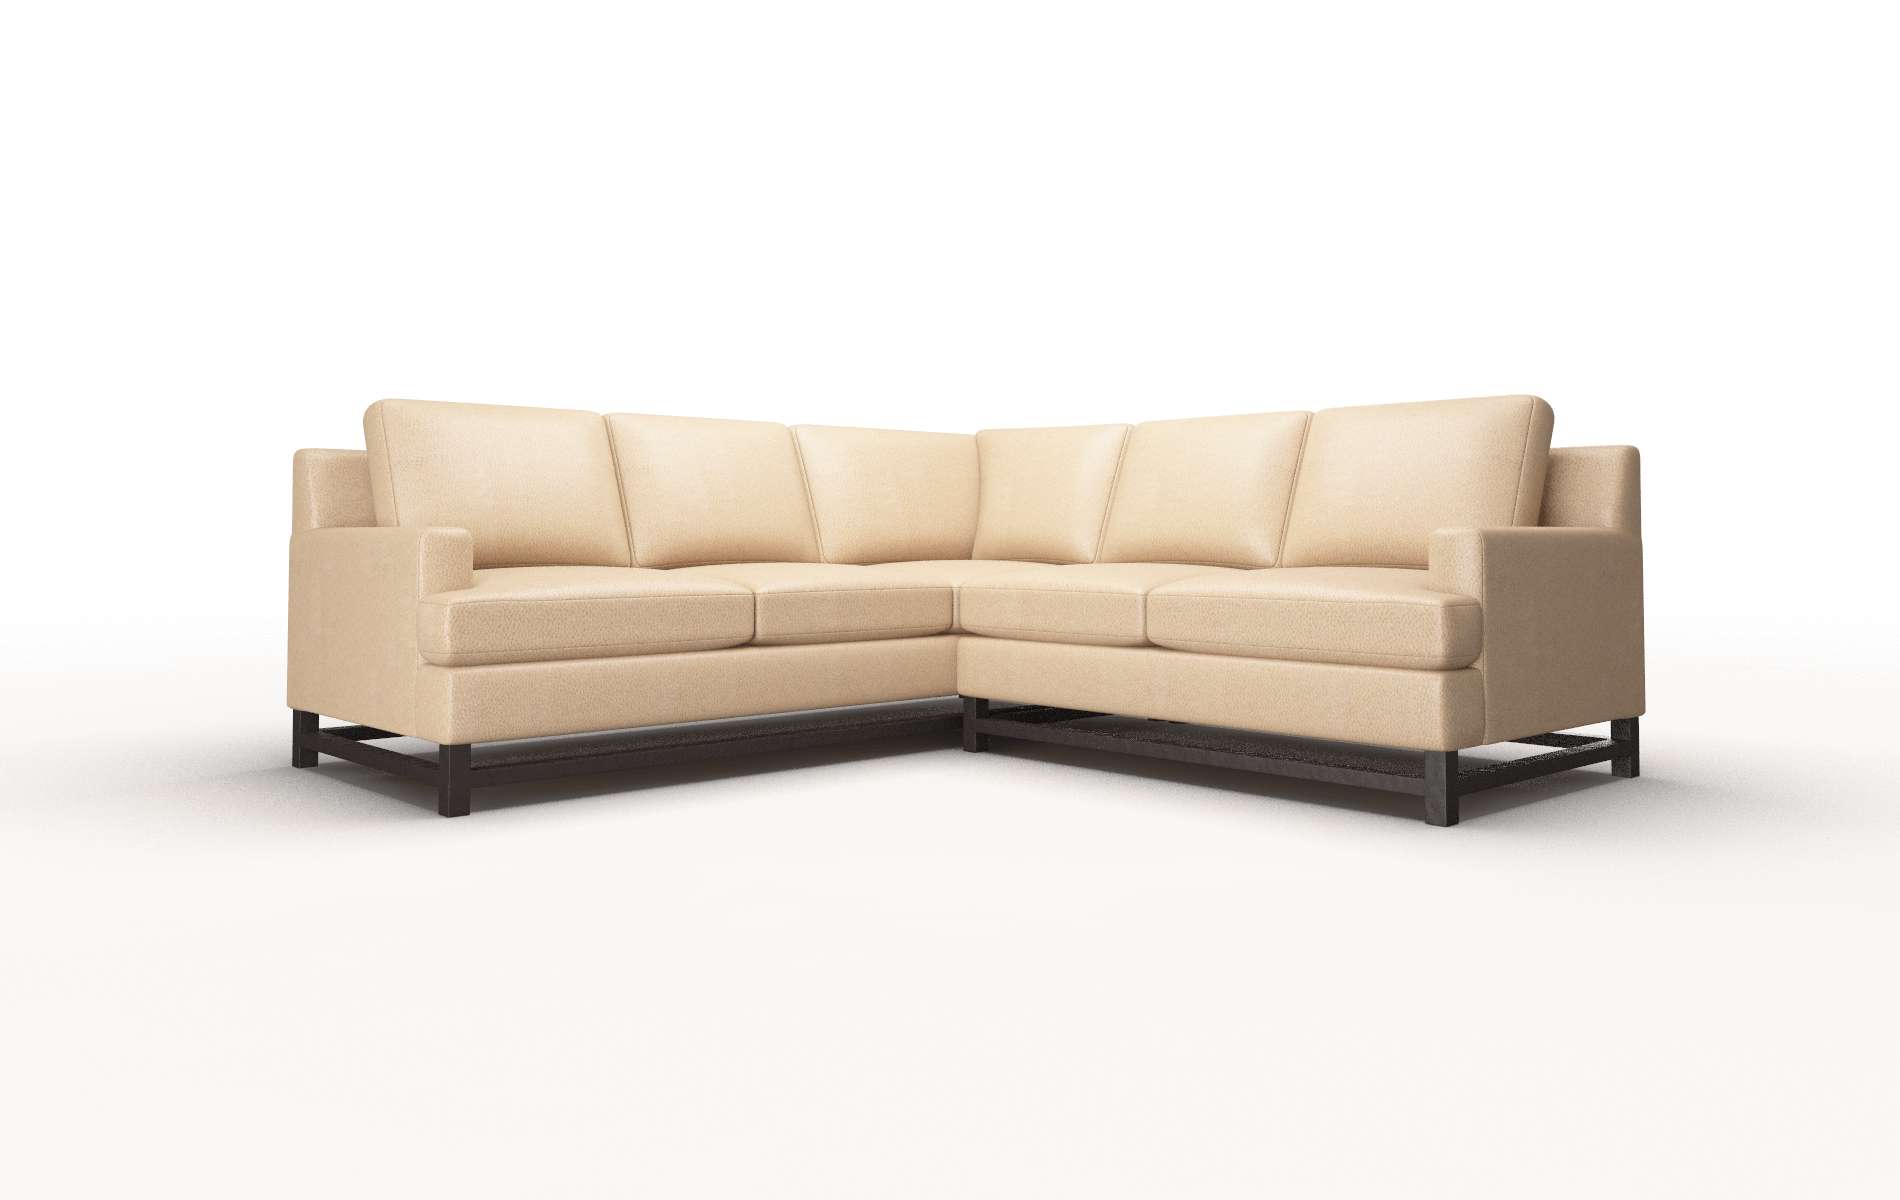 Houston Ford Dune Sectional espresso legs